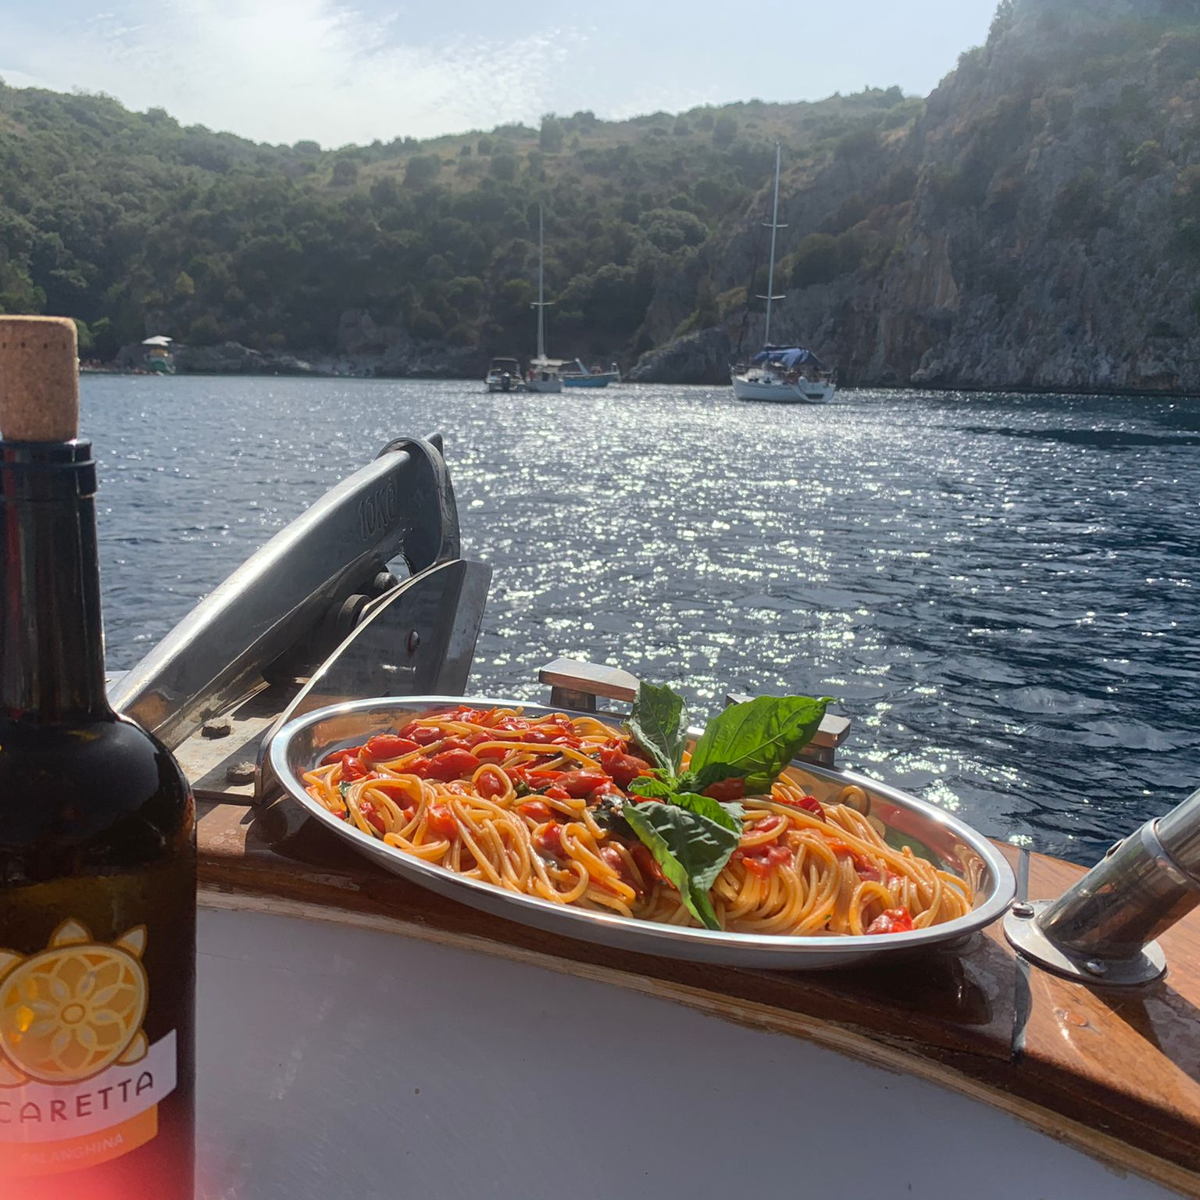 TASTE AND SAIL IN THE GULF OF NAPLES